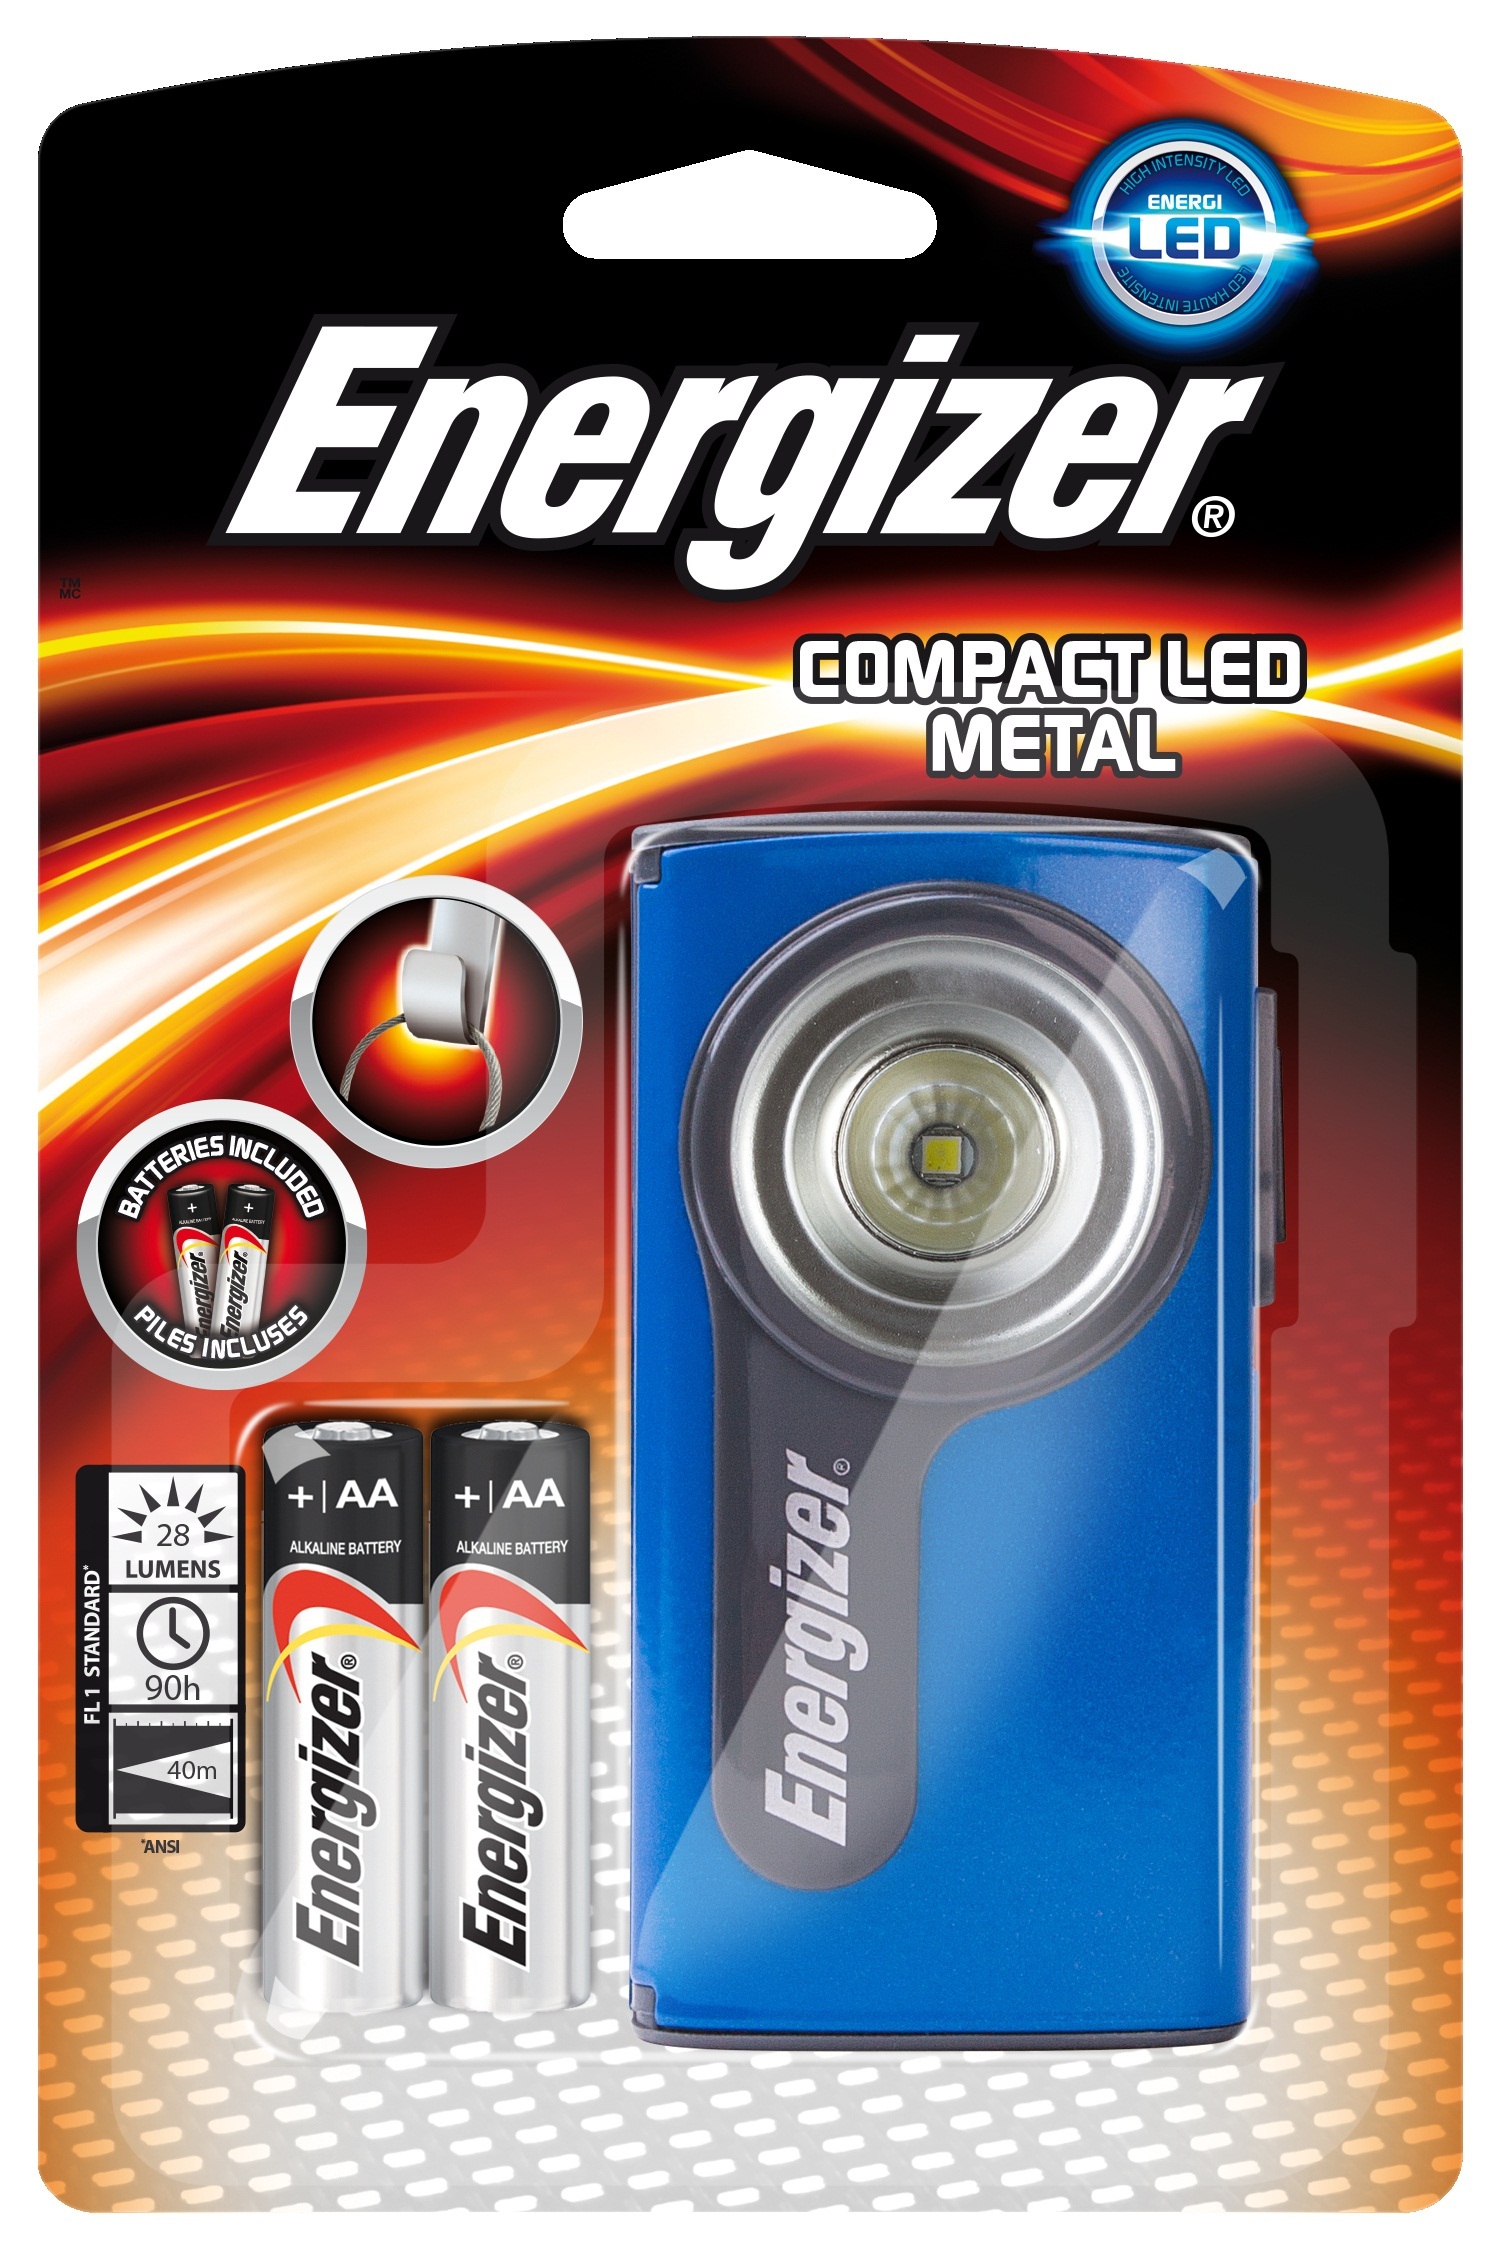 Energizer Zaklamp Compact LED - 2AA incl.